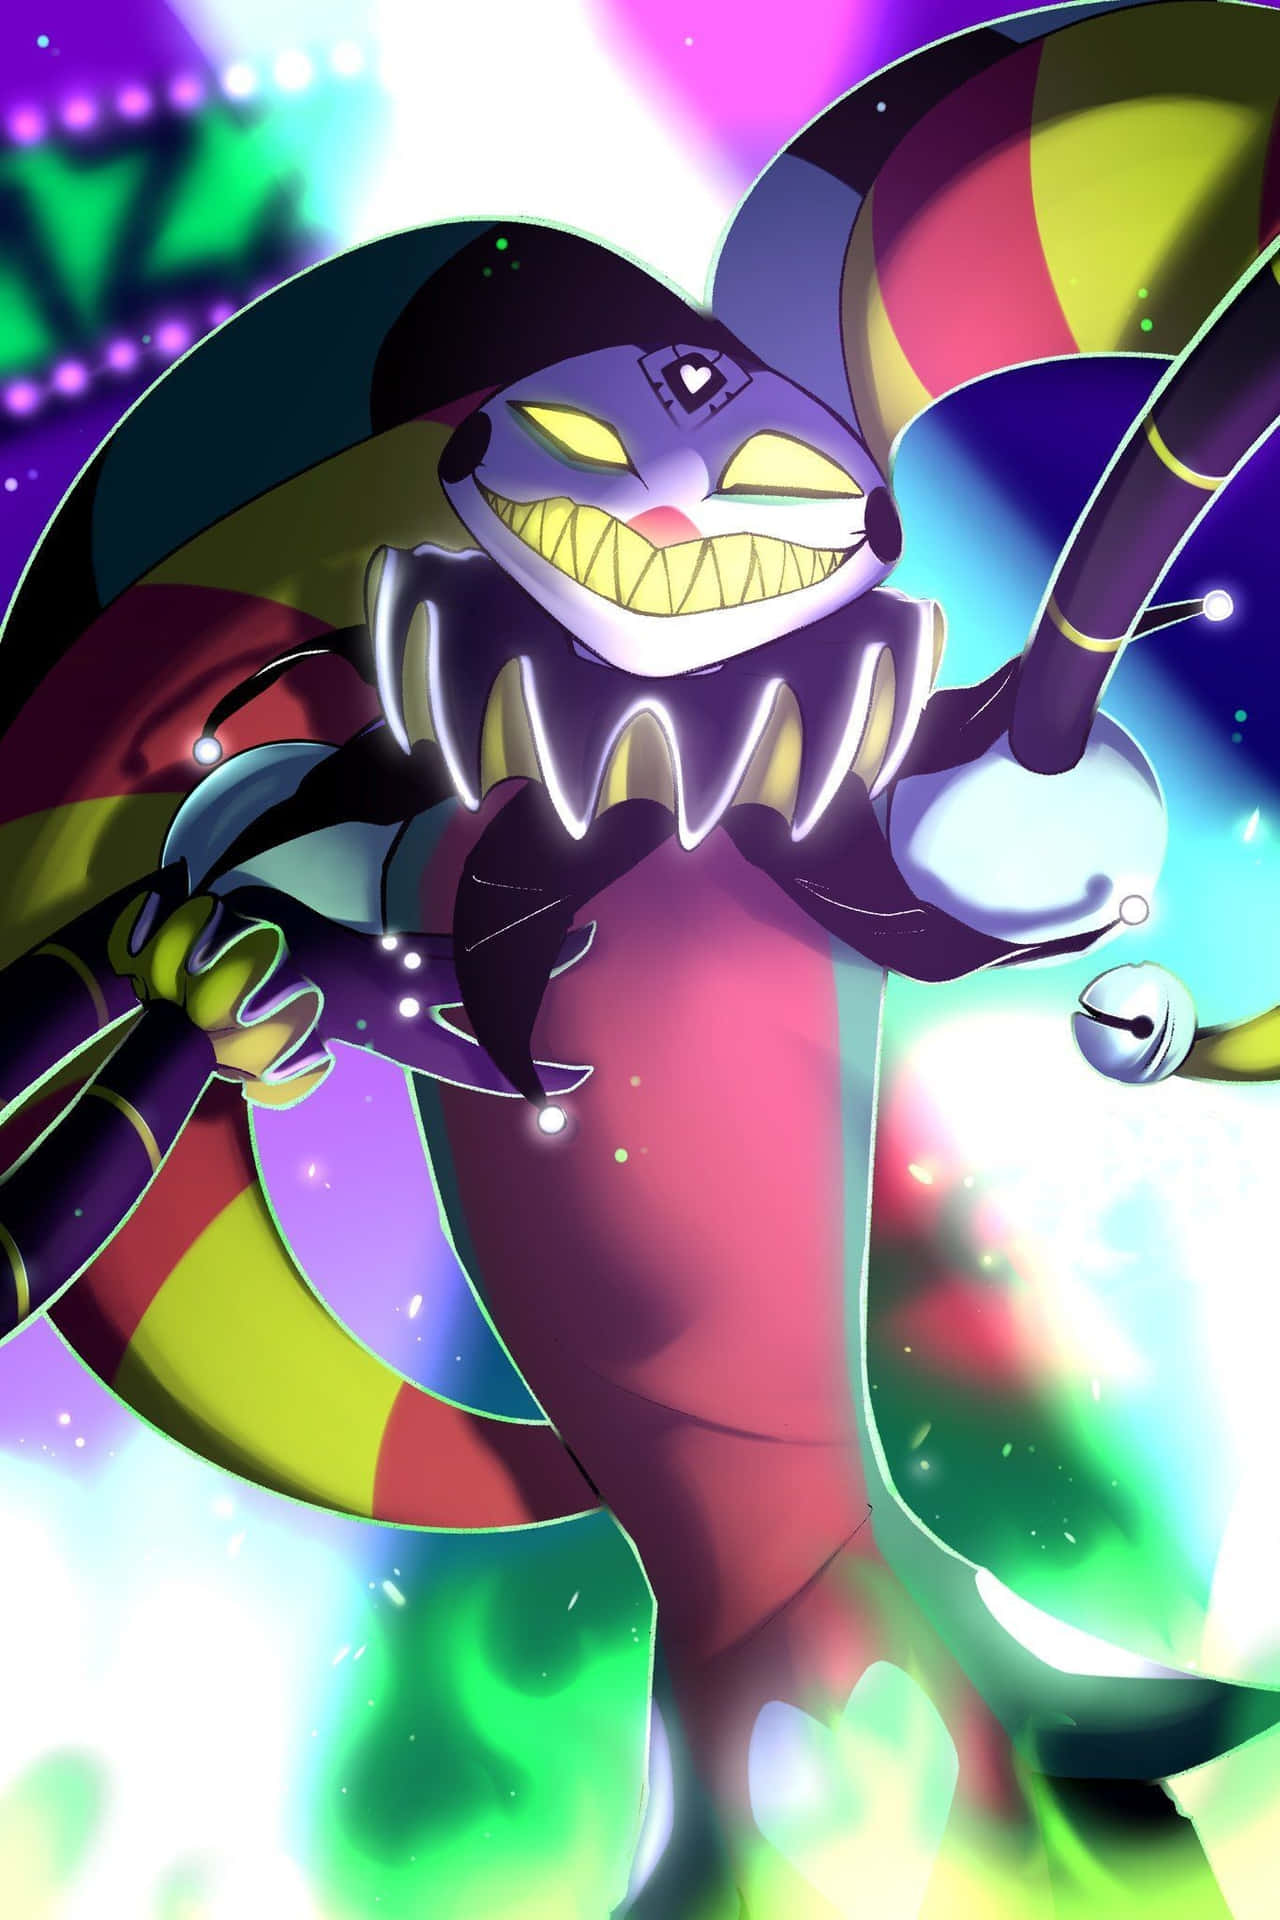 Colorful Jester Character Art Wallpaper